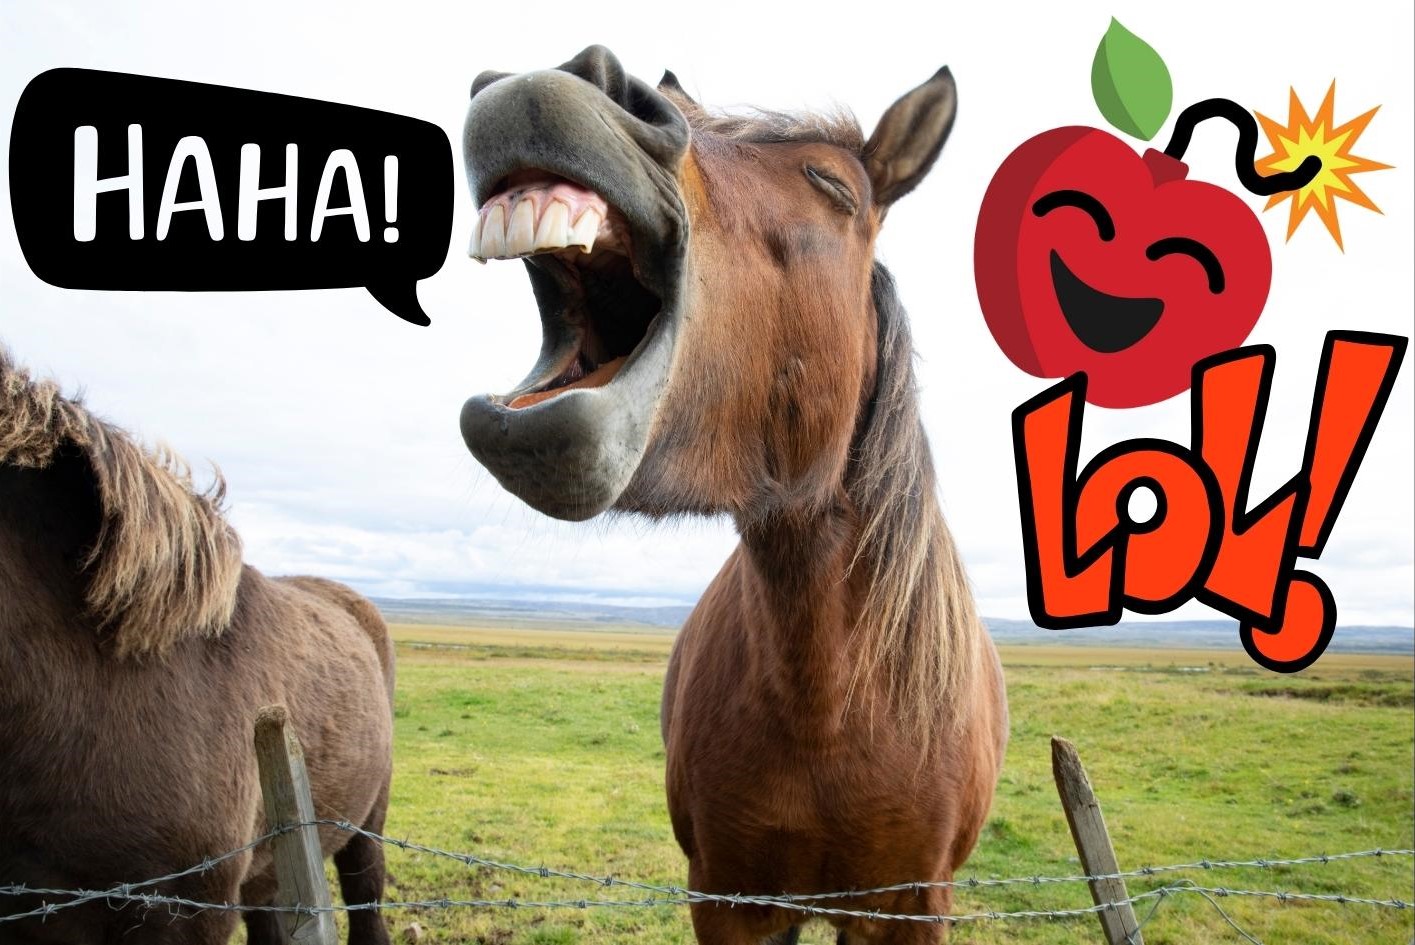 A horse laughing at all the funny exam answers from students with superimposed Teacher Misery branding.